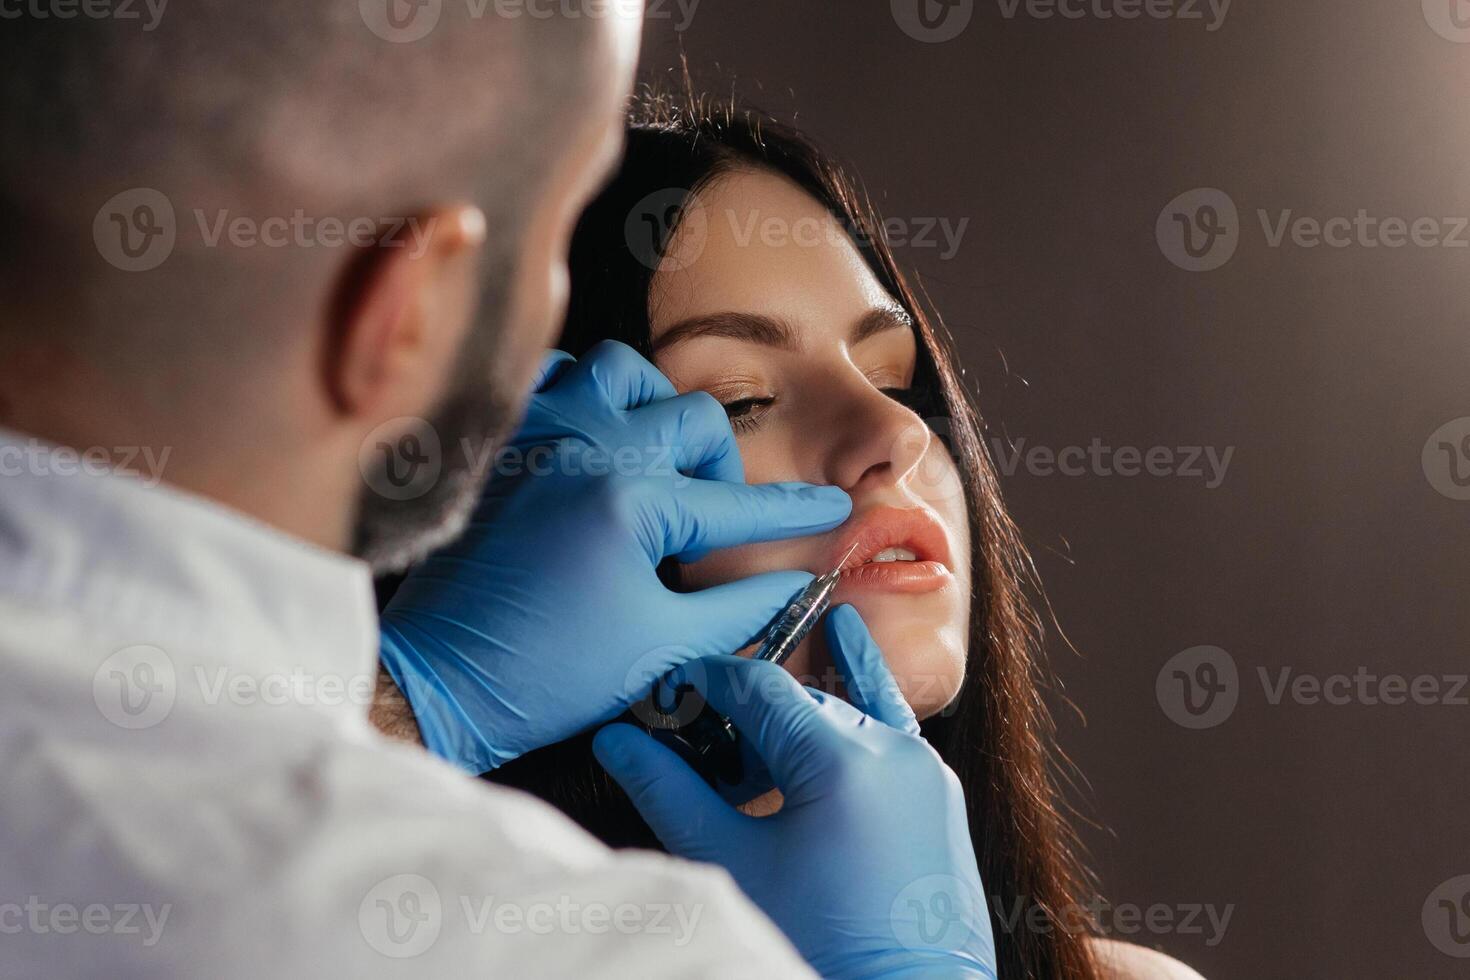 The doctor cosmetologist makes Lip augmentation procedure of a beautiful woman in a beauty salon.Cosmetology skin care. High quality photo